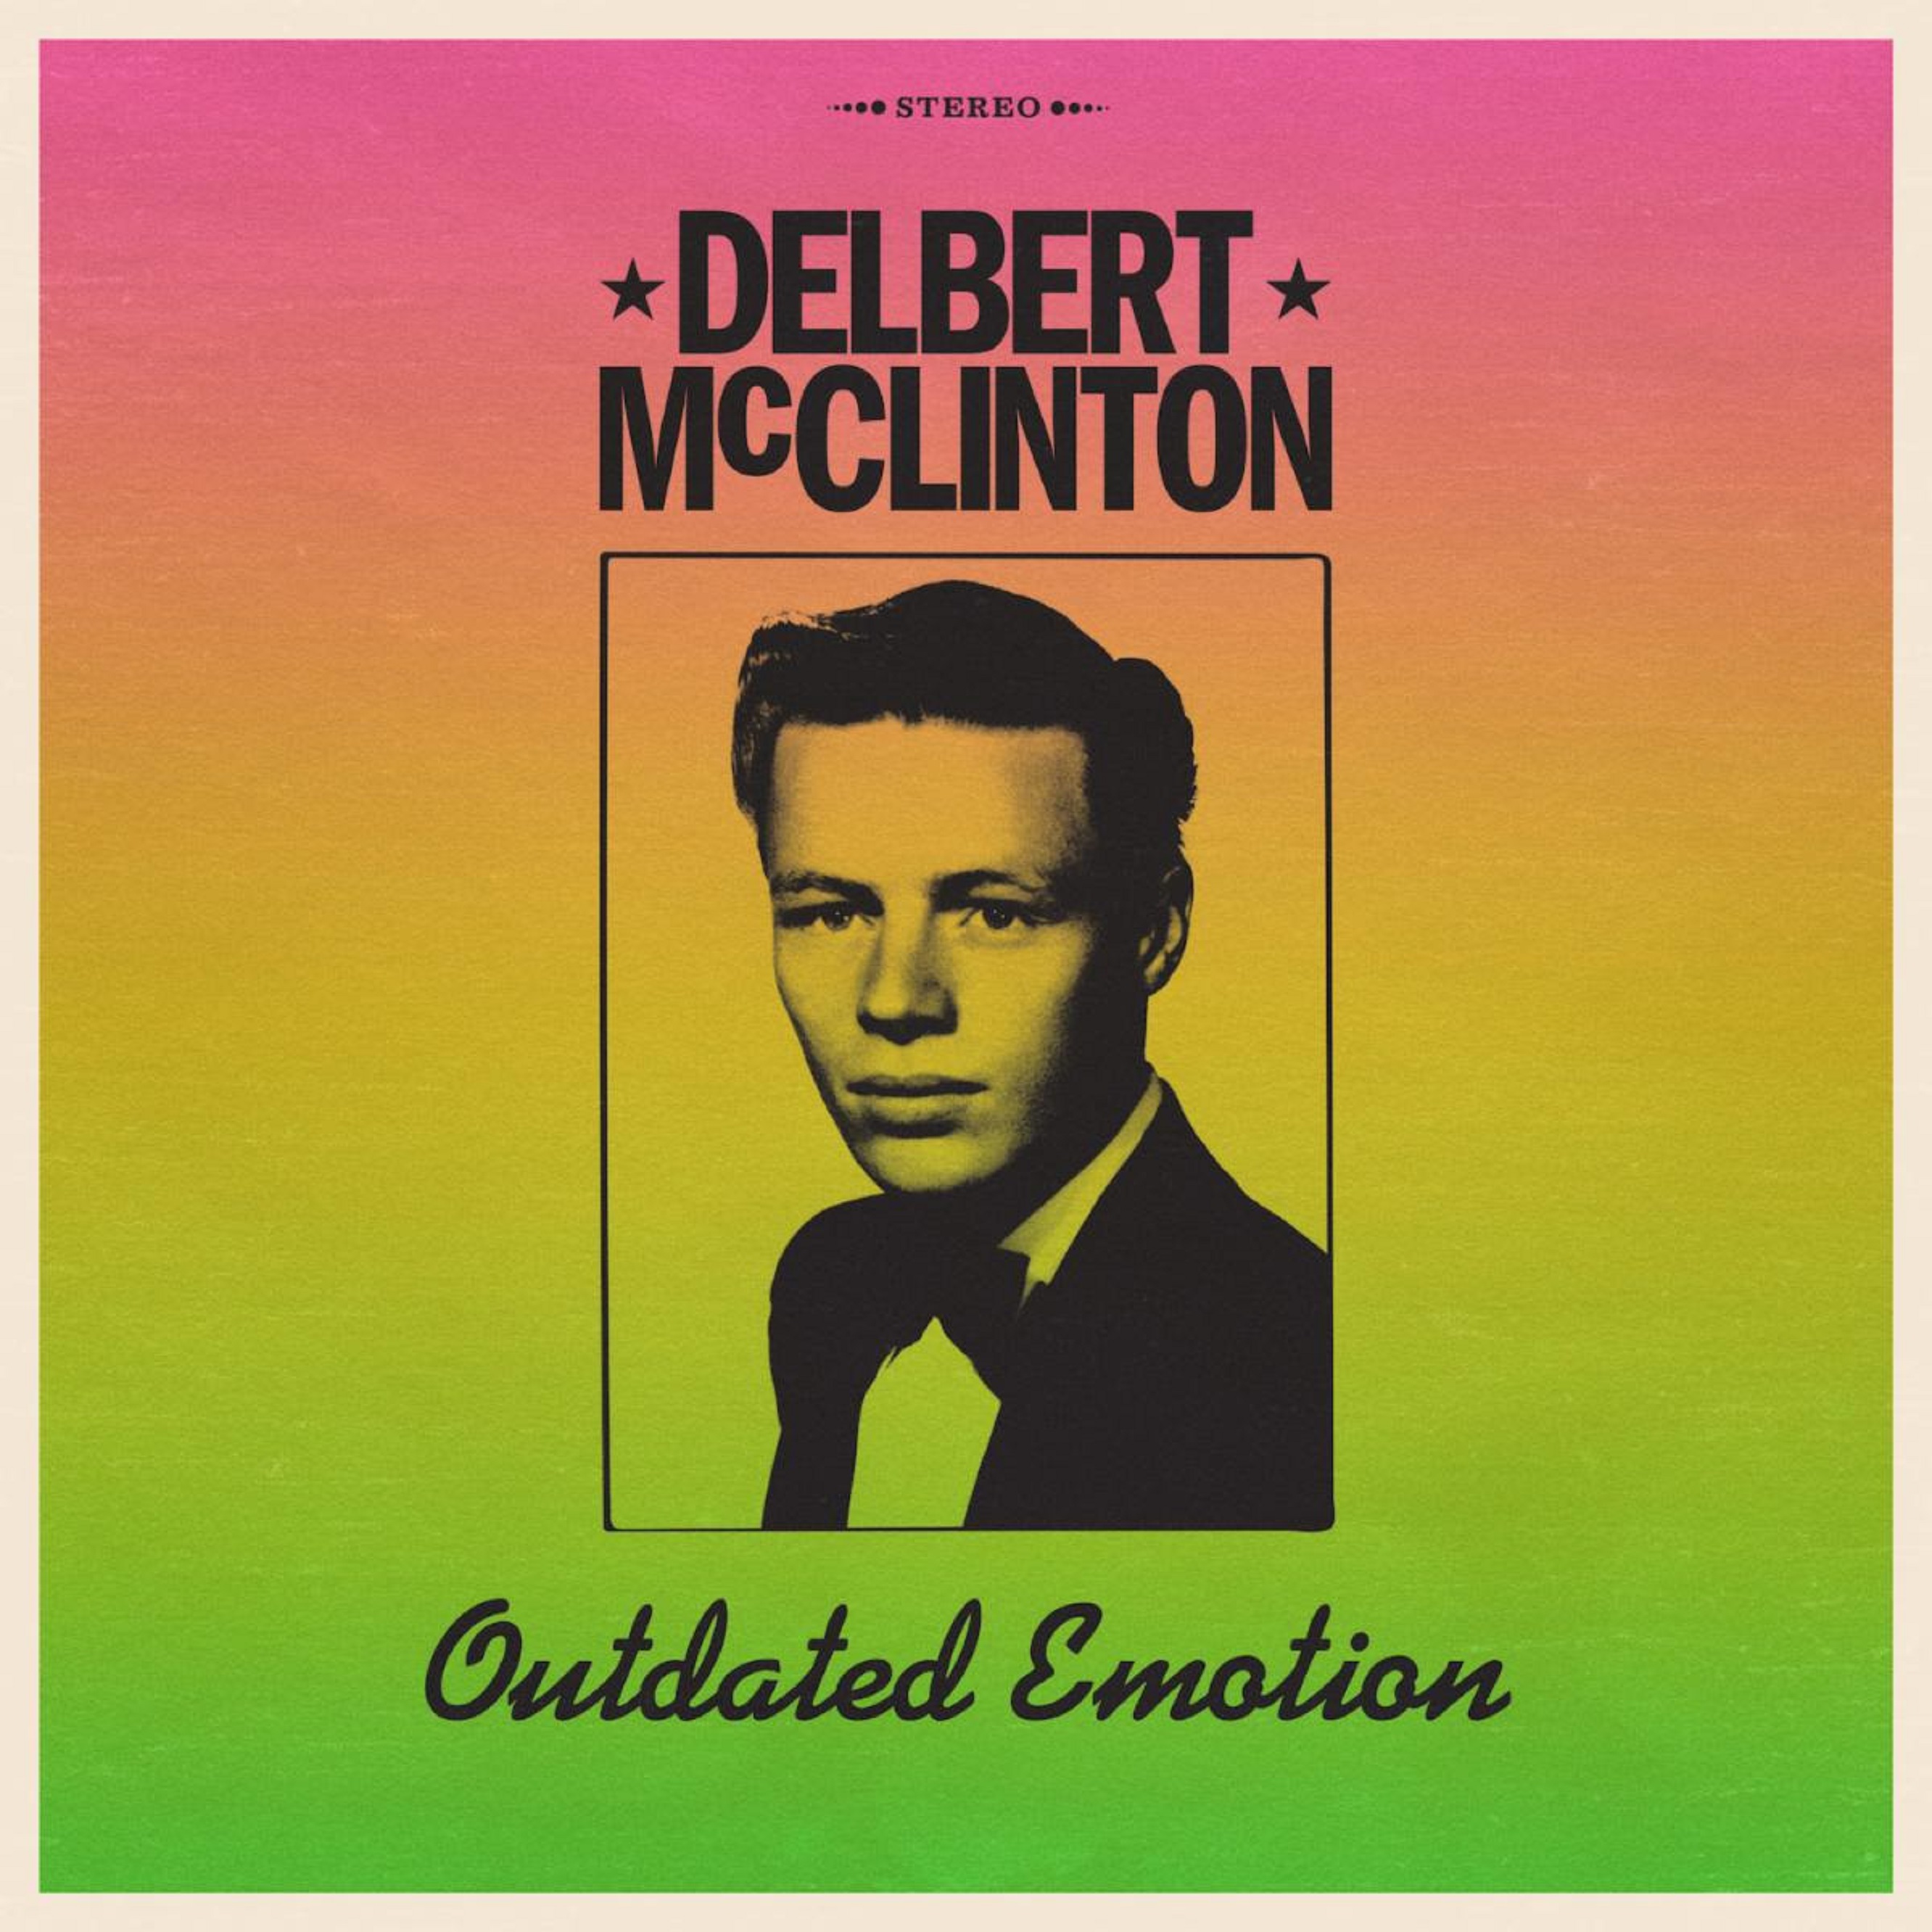 Delbert McClinton reunites with the songs of his youth (Hank Williams, Ray Charles) on 'Outdated Emotion' out now